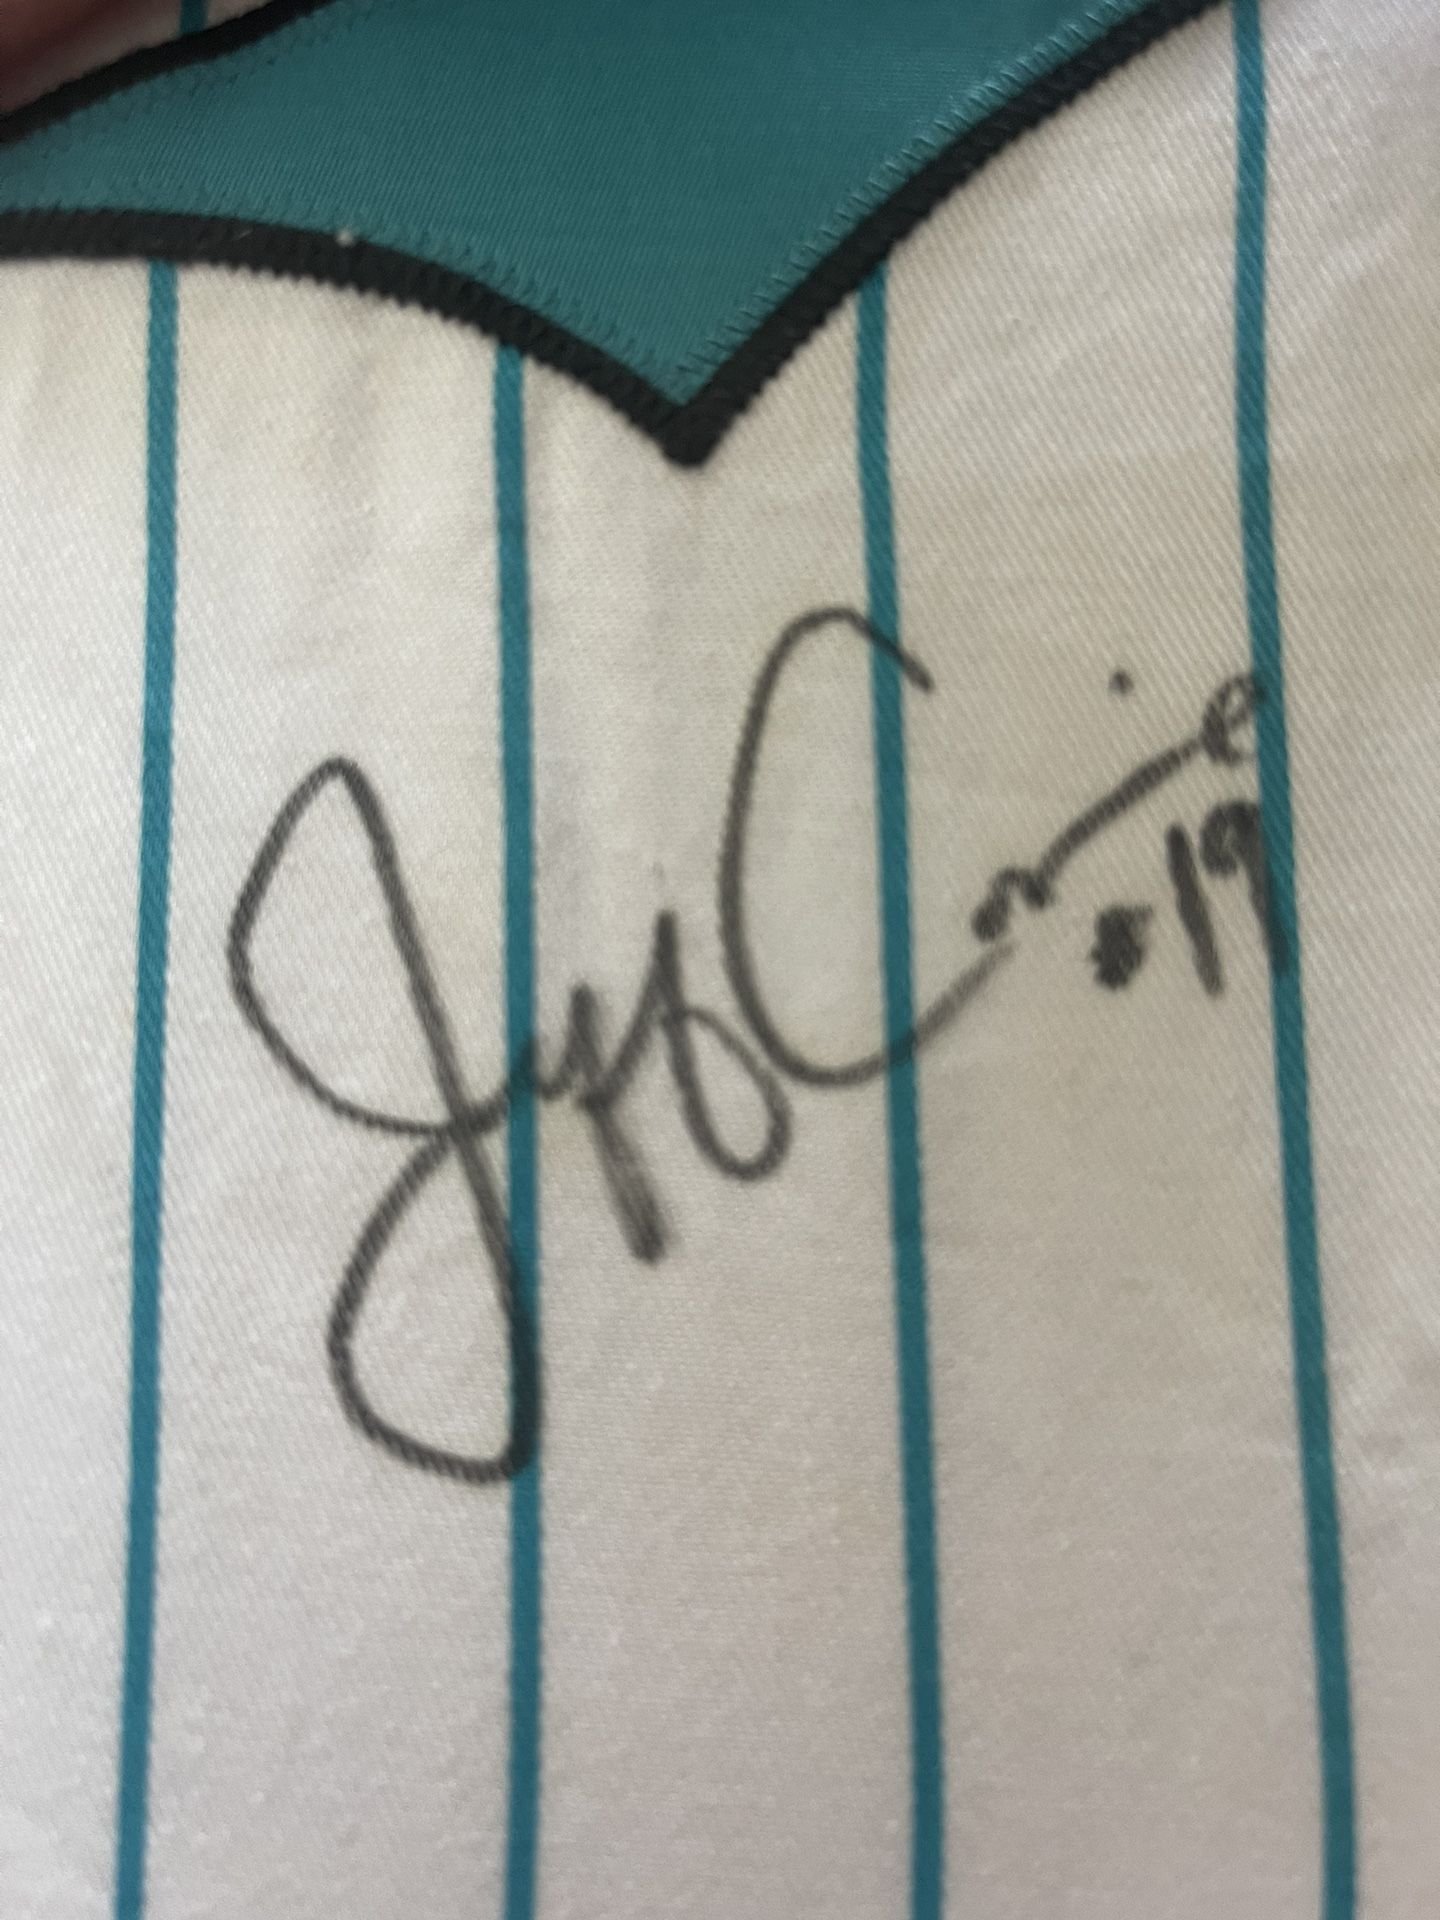 Marlins Jeff Conine Jersey Autographed for Sale in Miami, FL